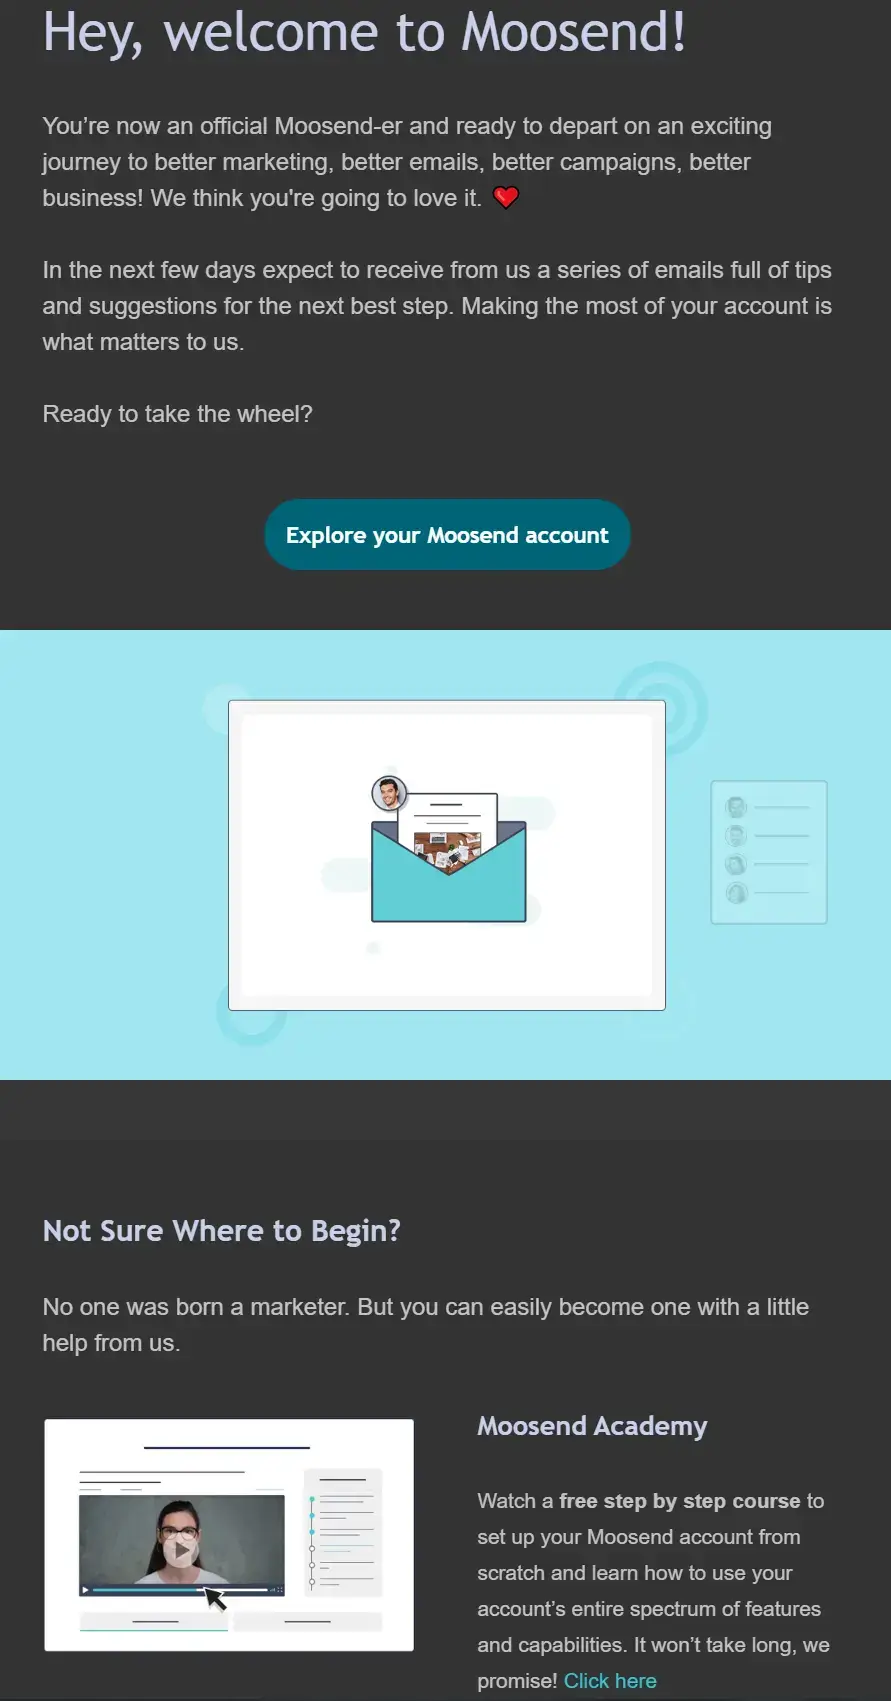 Example of an Onboarding Email by Moosend